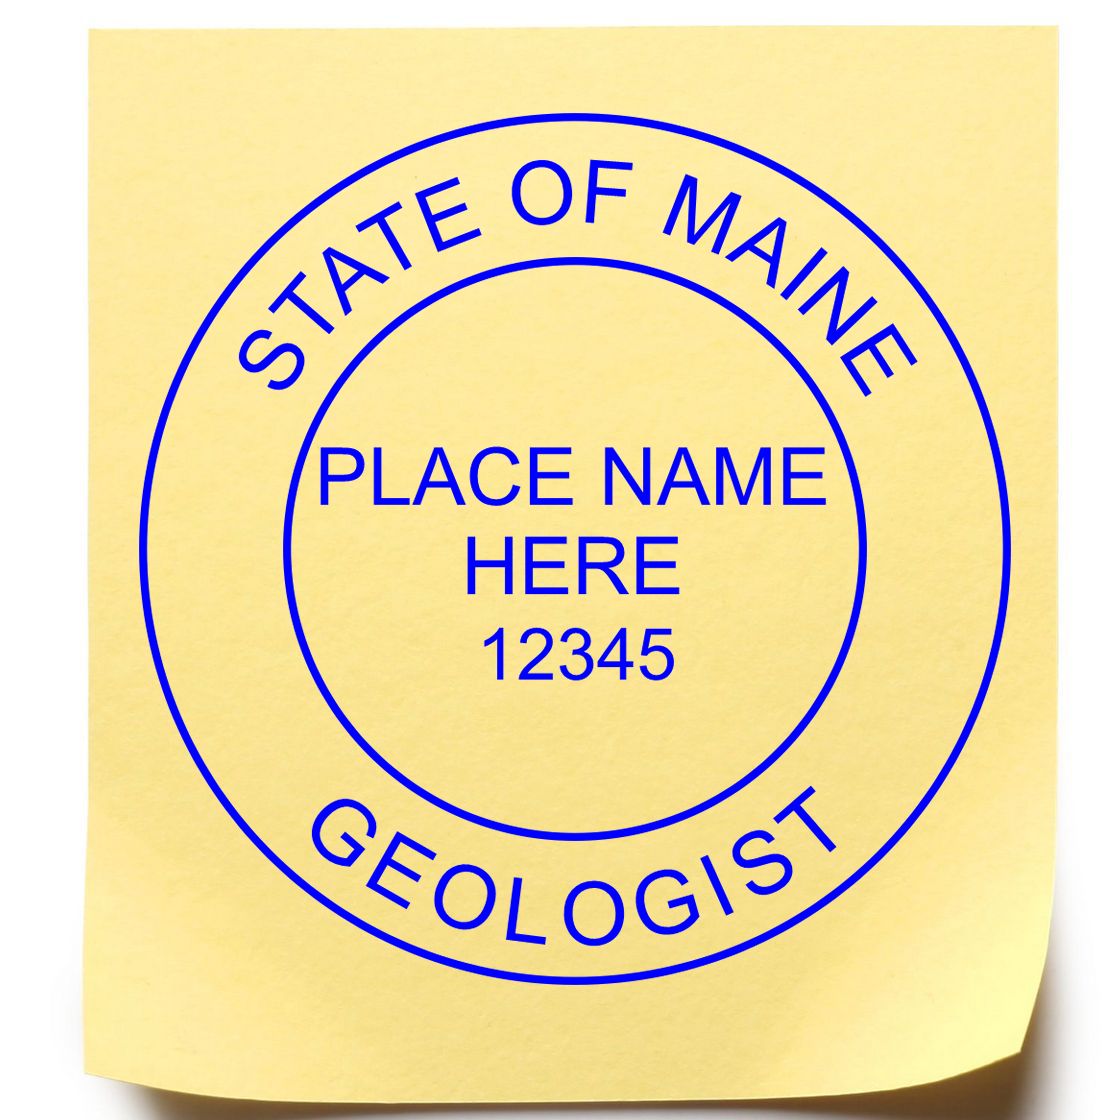 A lifestyle photo showing a stamped image of the Digital Maine Geologist Stamp, Electronic Seal for Maine Geologist on a piece of paper